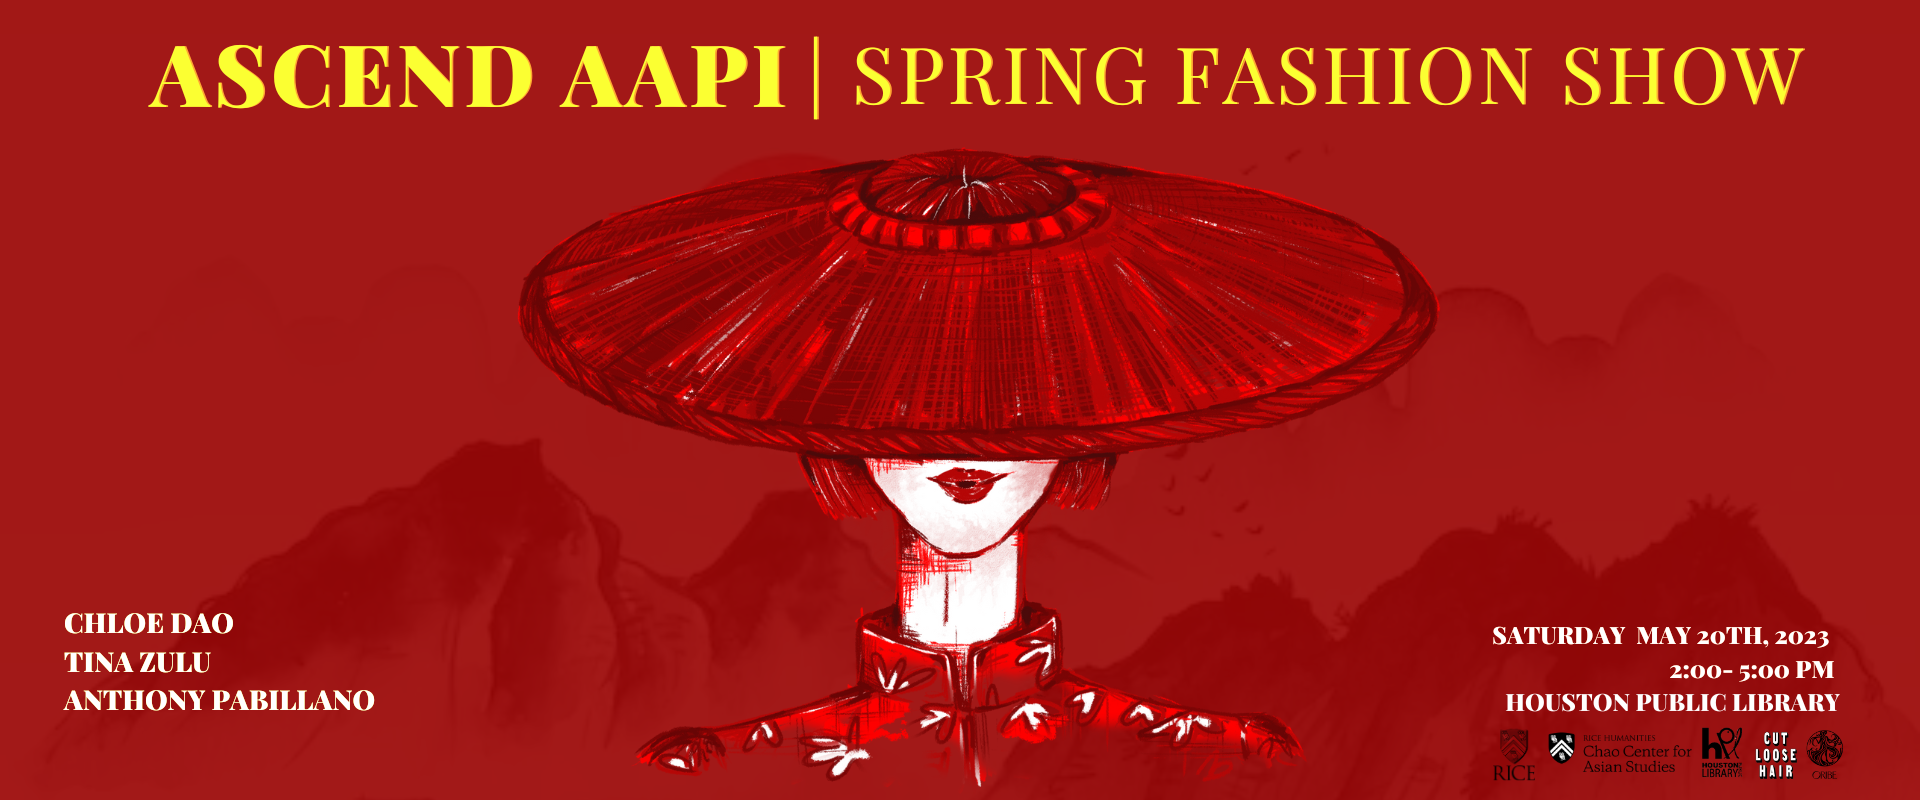 Promo drawing for the fashion show showing a woman dressed in red wearing a large red hat, only her red lips visible